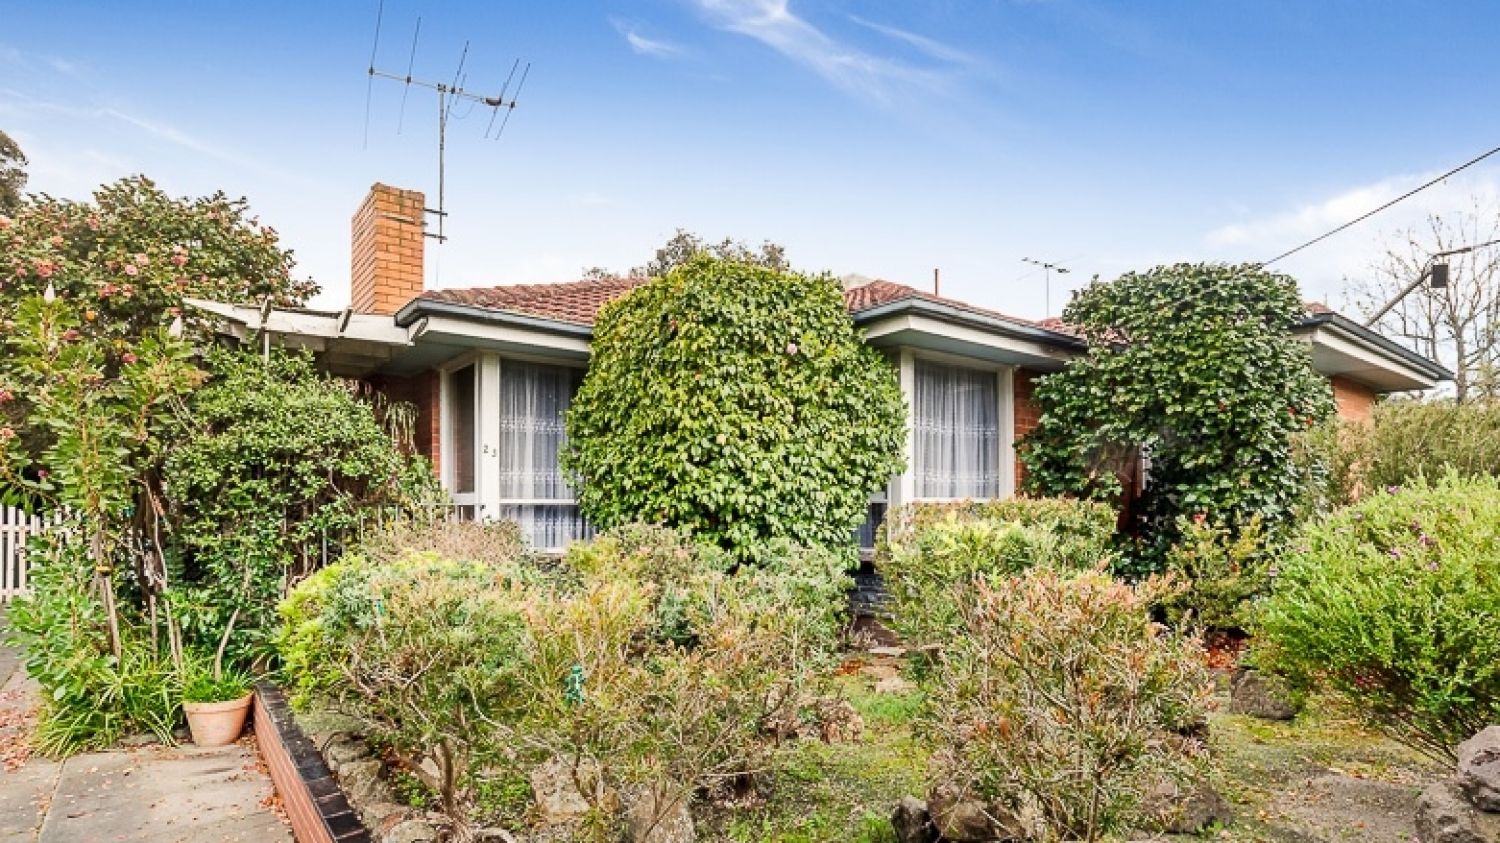 Middle to outer suburbs of Melbourne see huge price growth with buyers pushed out